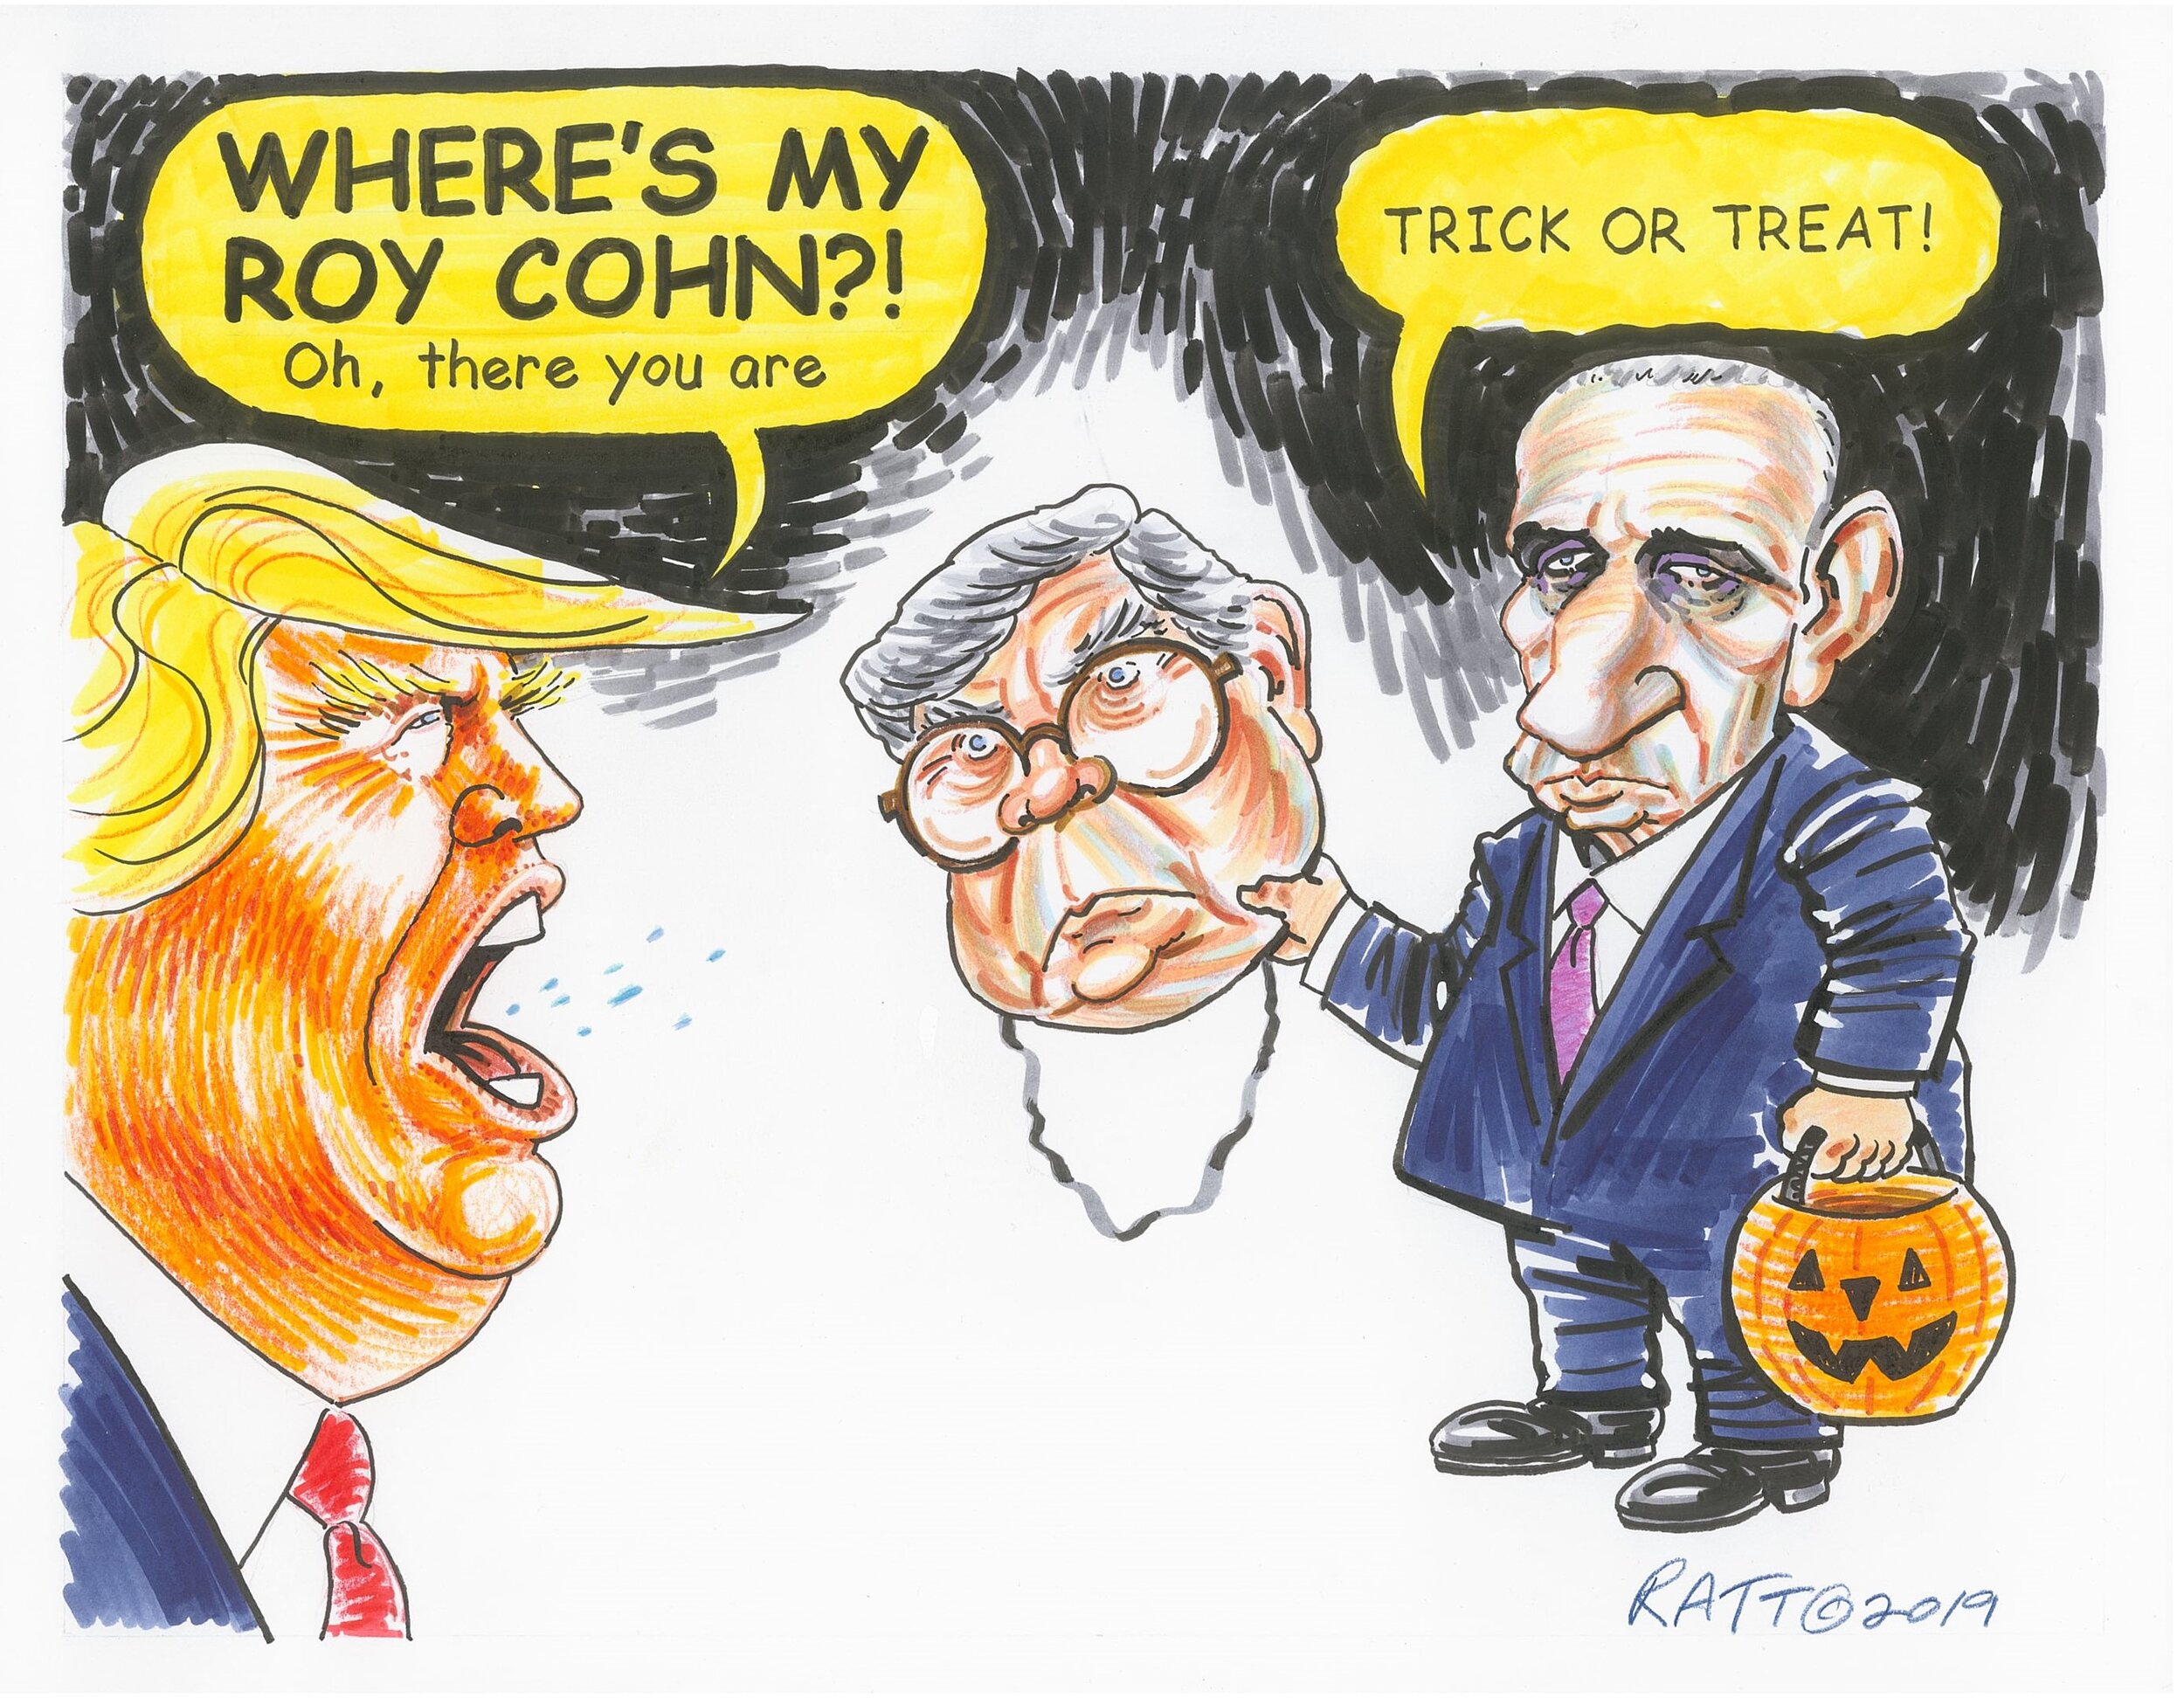   There’s his Roy Cohn, just in time for Halloween.  (The Rule of Law This Week, October 27, 2019.)  